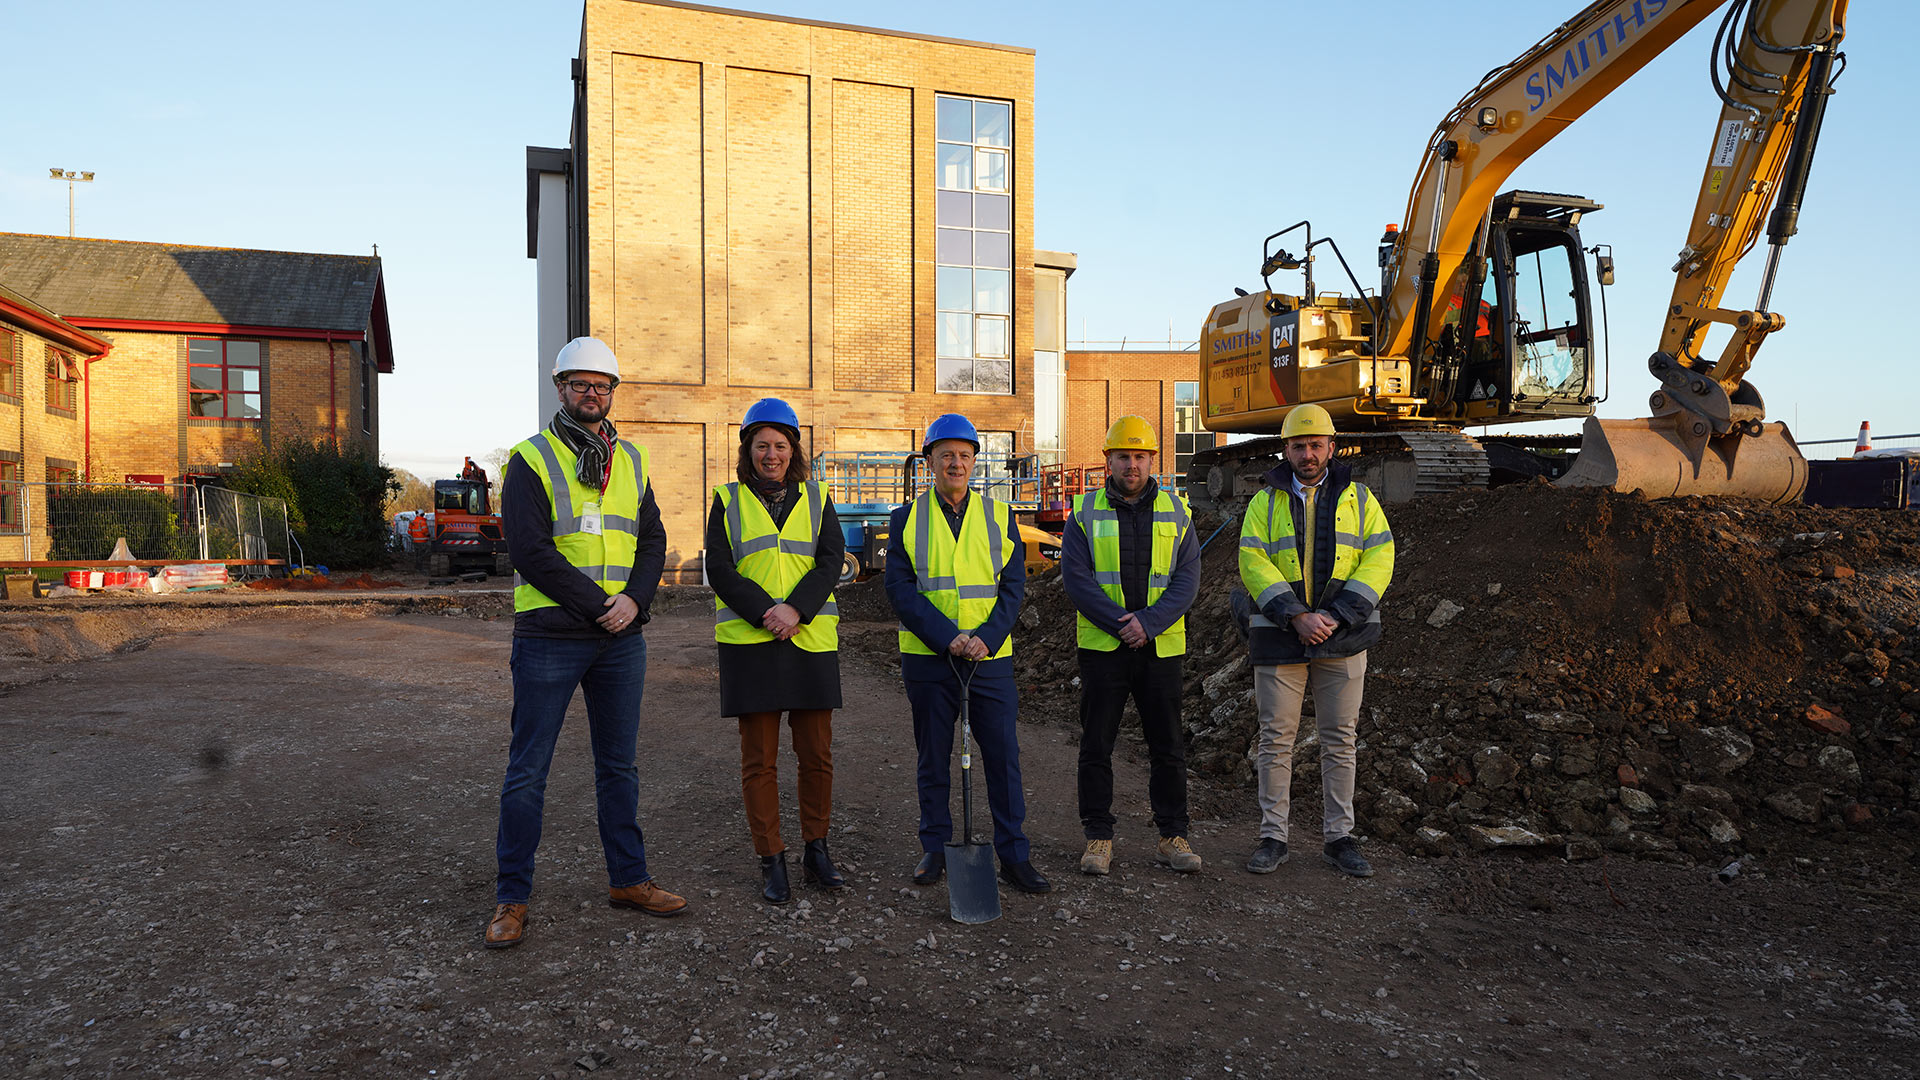 Cirencester College Breaks Ground on New £5m T-level Building